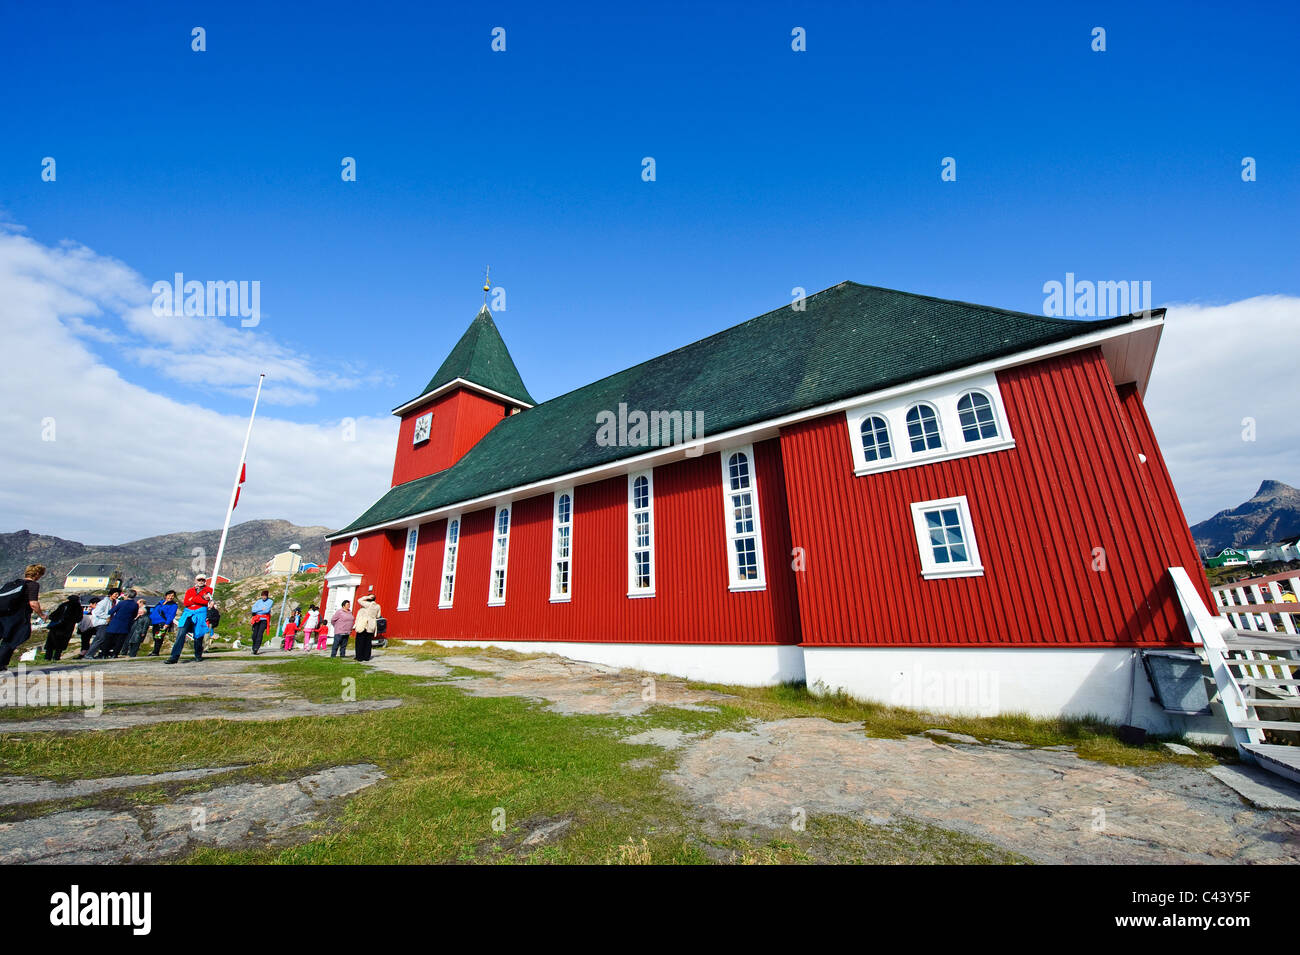 Greenland, Europe, Sisimiut, town, city, west coast, church, red, architecture, person, persons Stock Photo